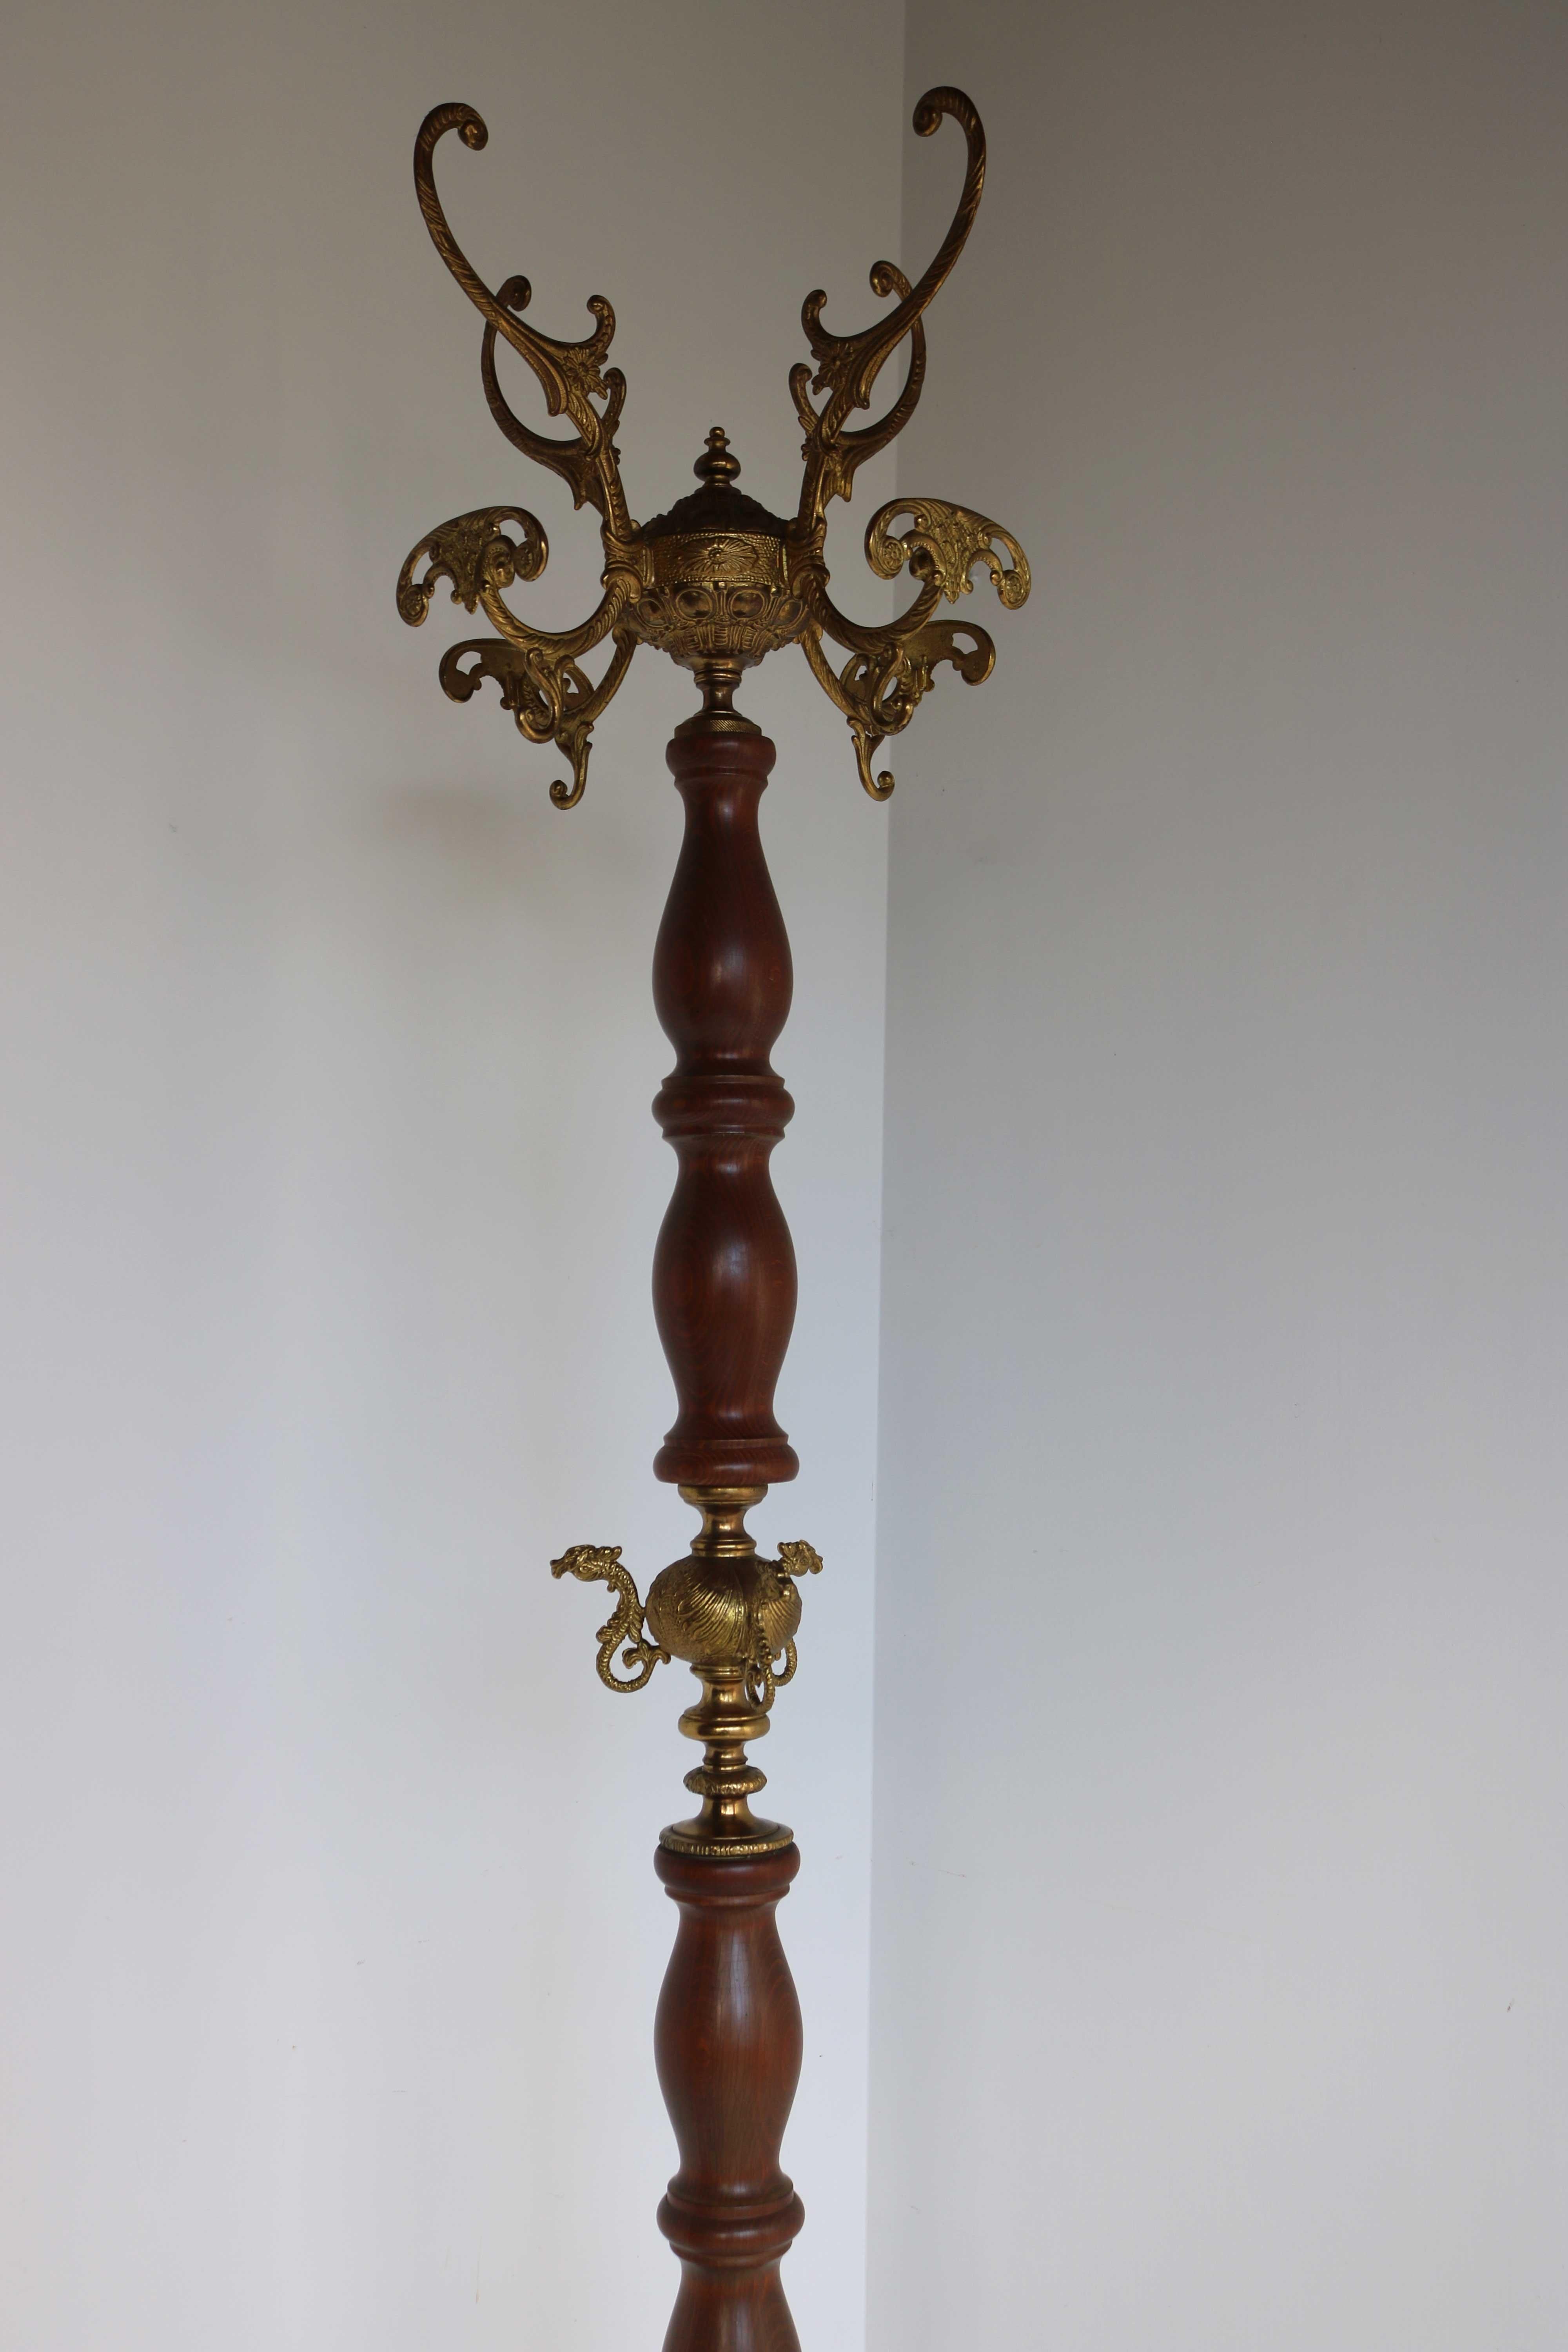 20th Century Mid-Century Italian Ornate Brass And Wood Coat Stand / Hat Rack , 60s Hall Tree For Sale